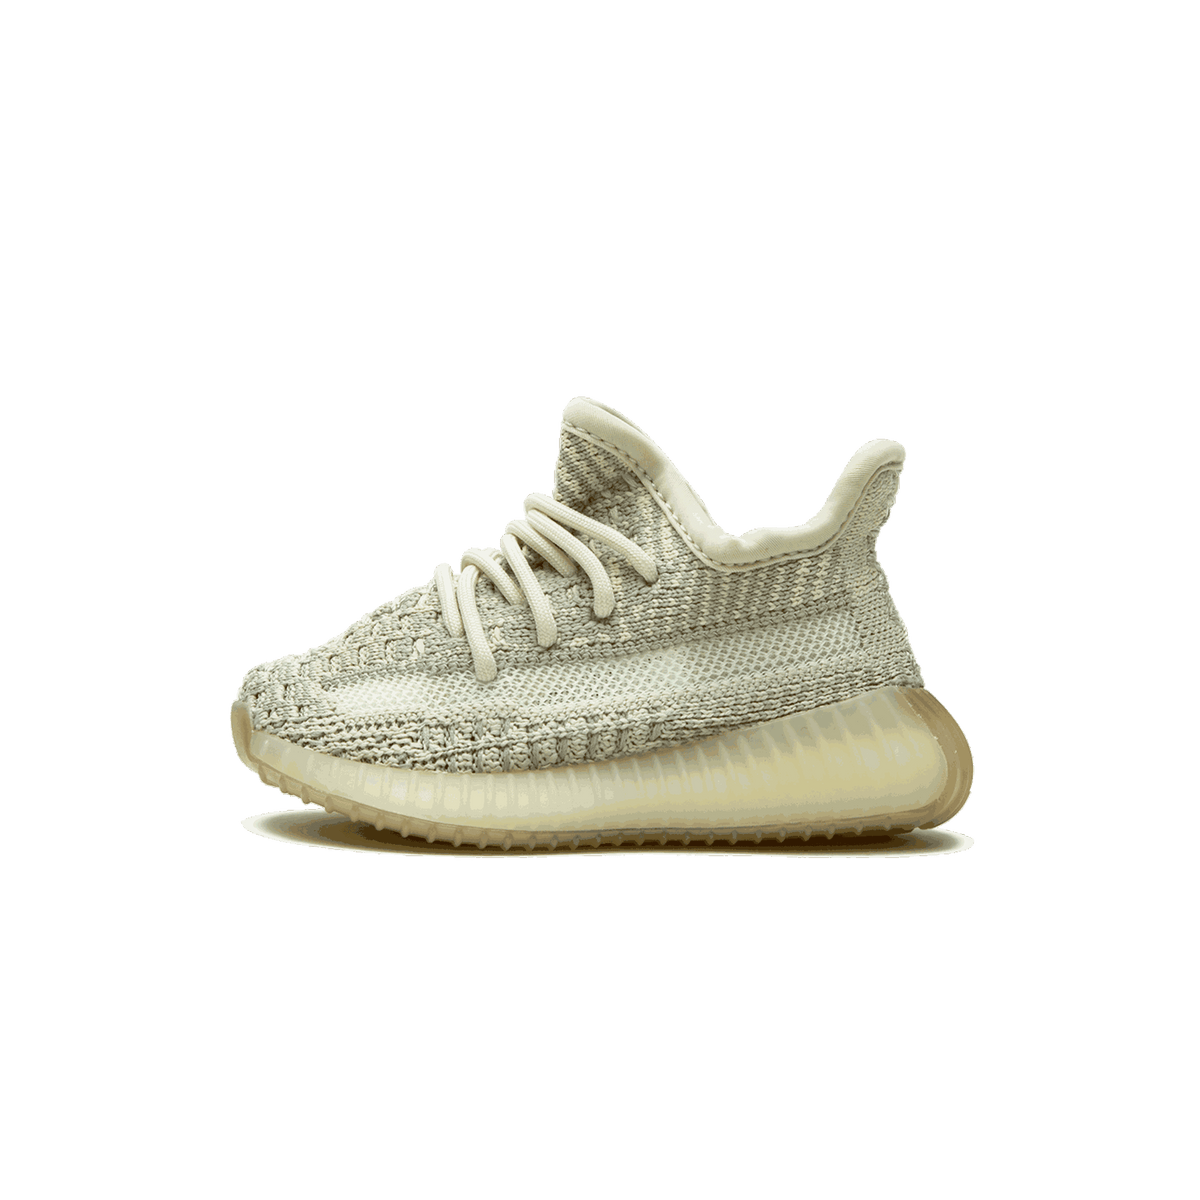 adidas bags Yeezy Boost 350 V2 Infant Citrin Non Reflective